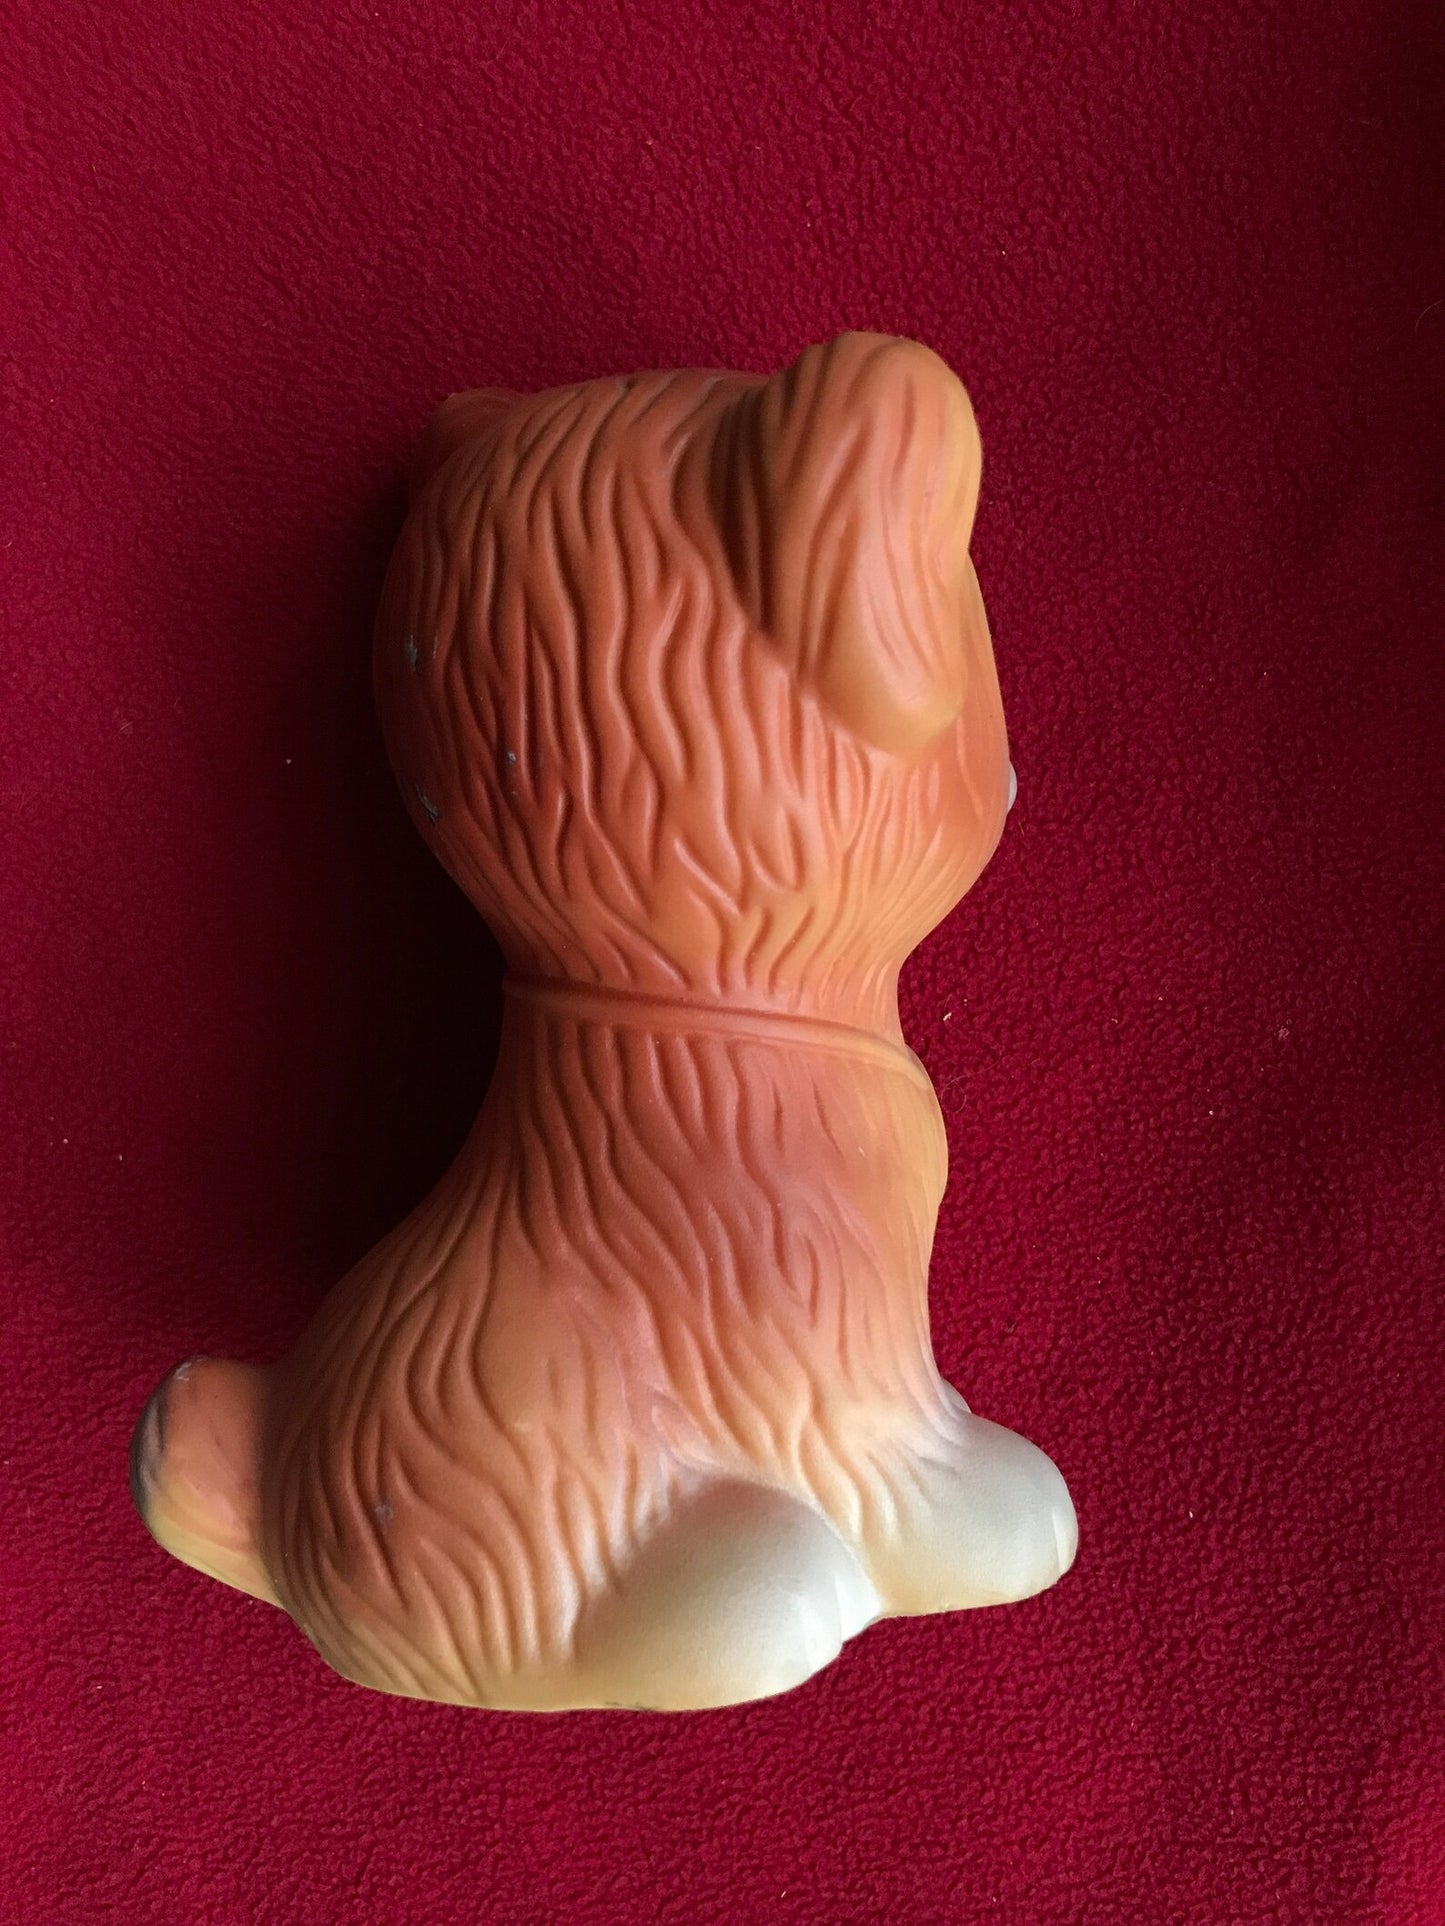 Rare find! Vintage 1970s rubber toy - sitting DOG with medal - Made in Soviet Union - Lovely USSR retro toy - Collectible vintage toy.